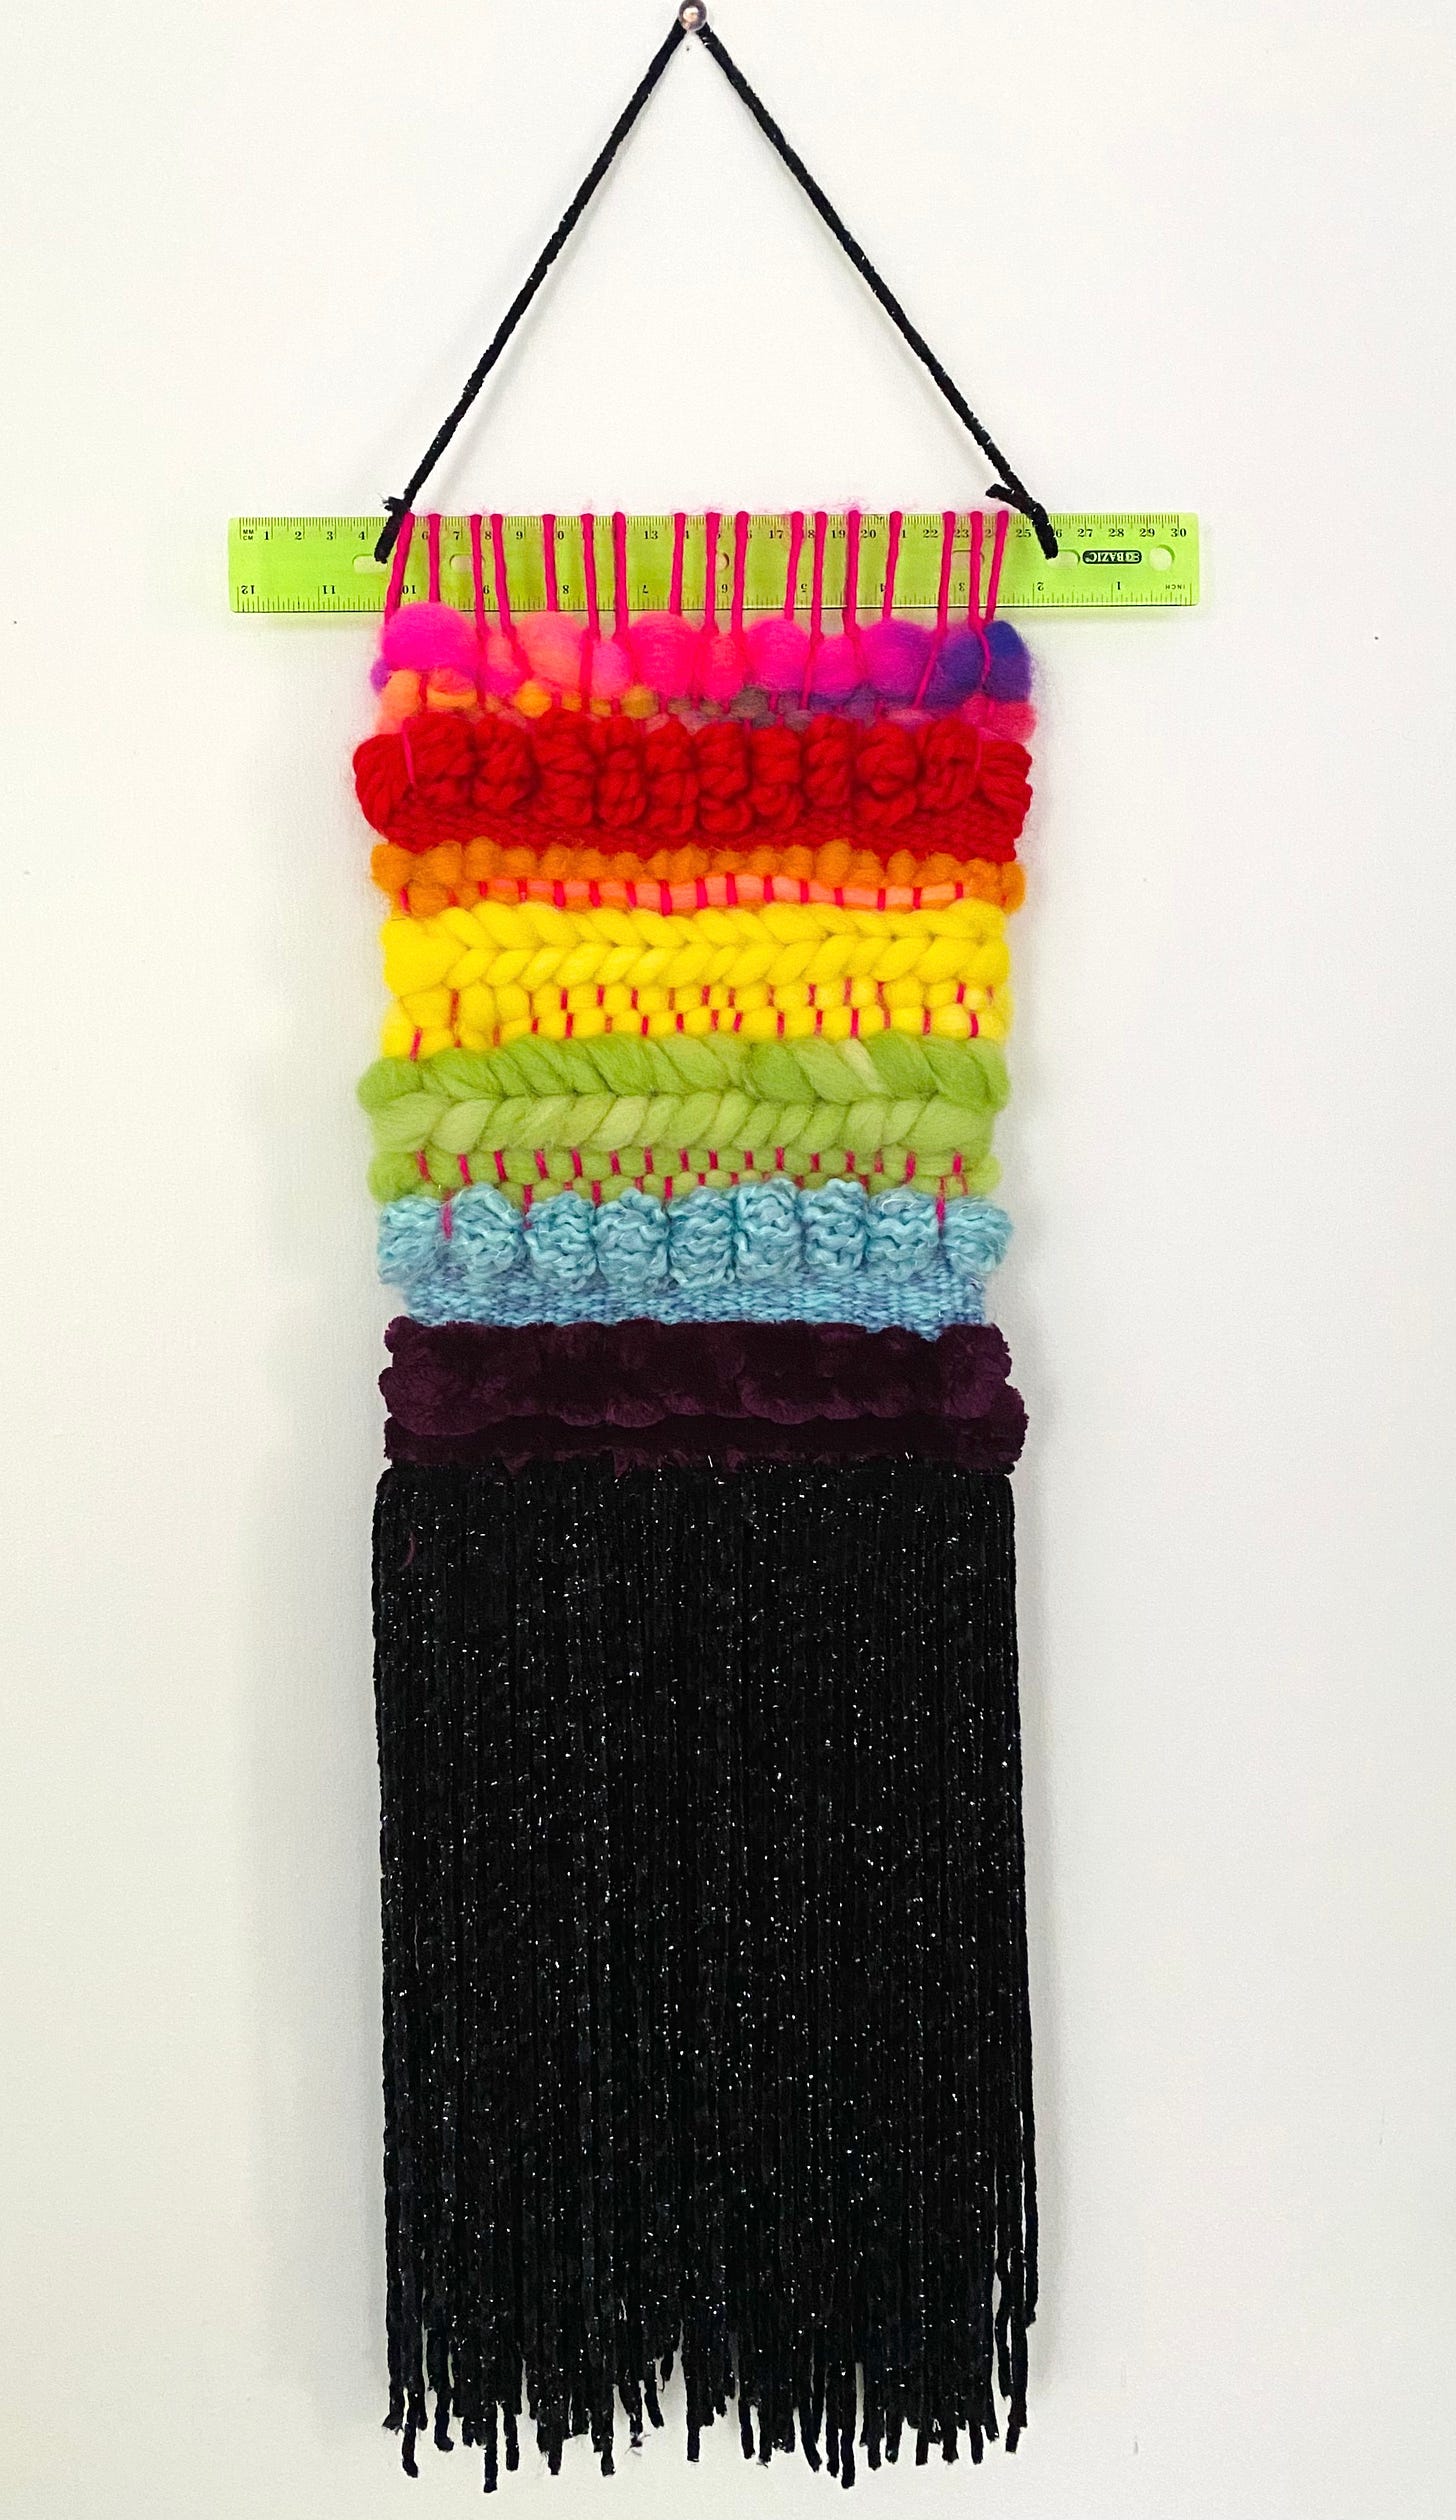 A woven wall tapestry about 2.5 feet long that is the colors of the LGBT Pride Flag from pink to black. It is hung on a lime green ruler.